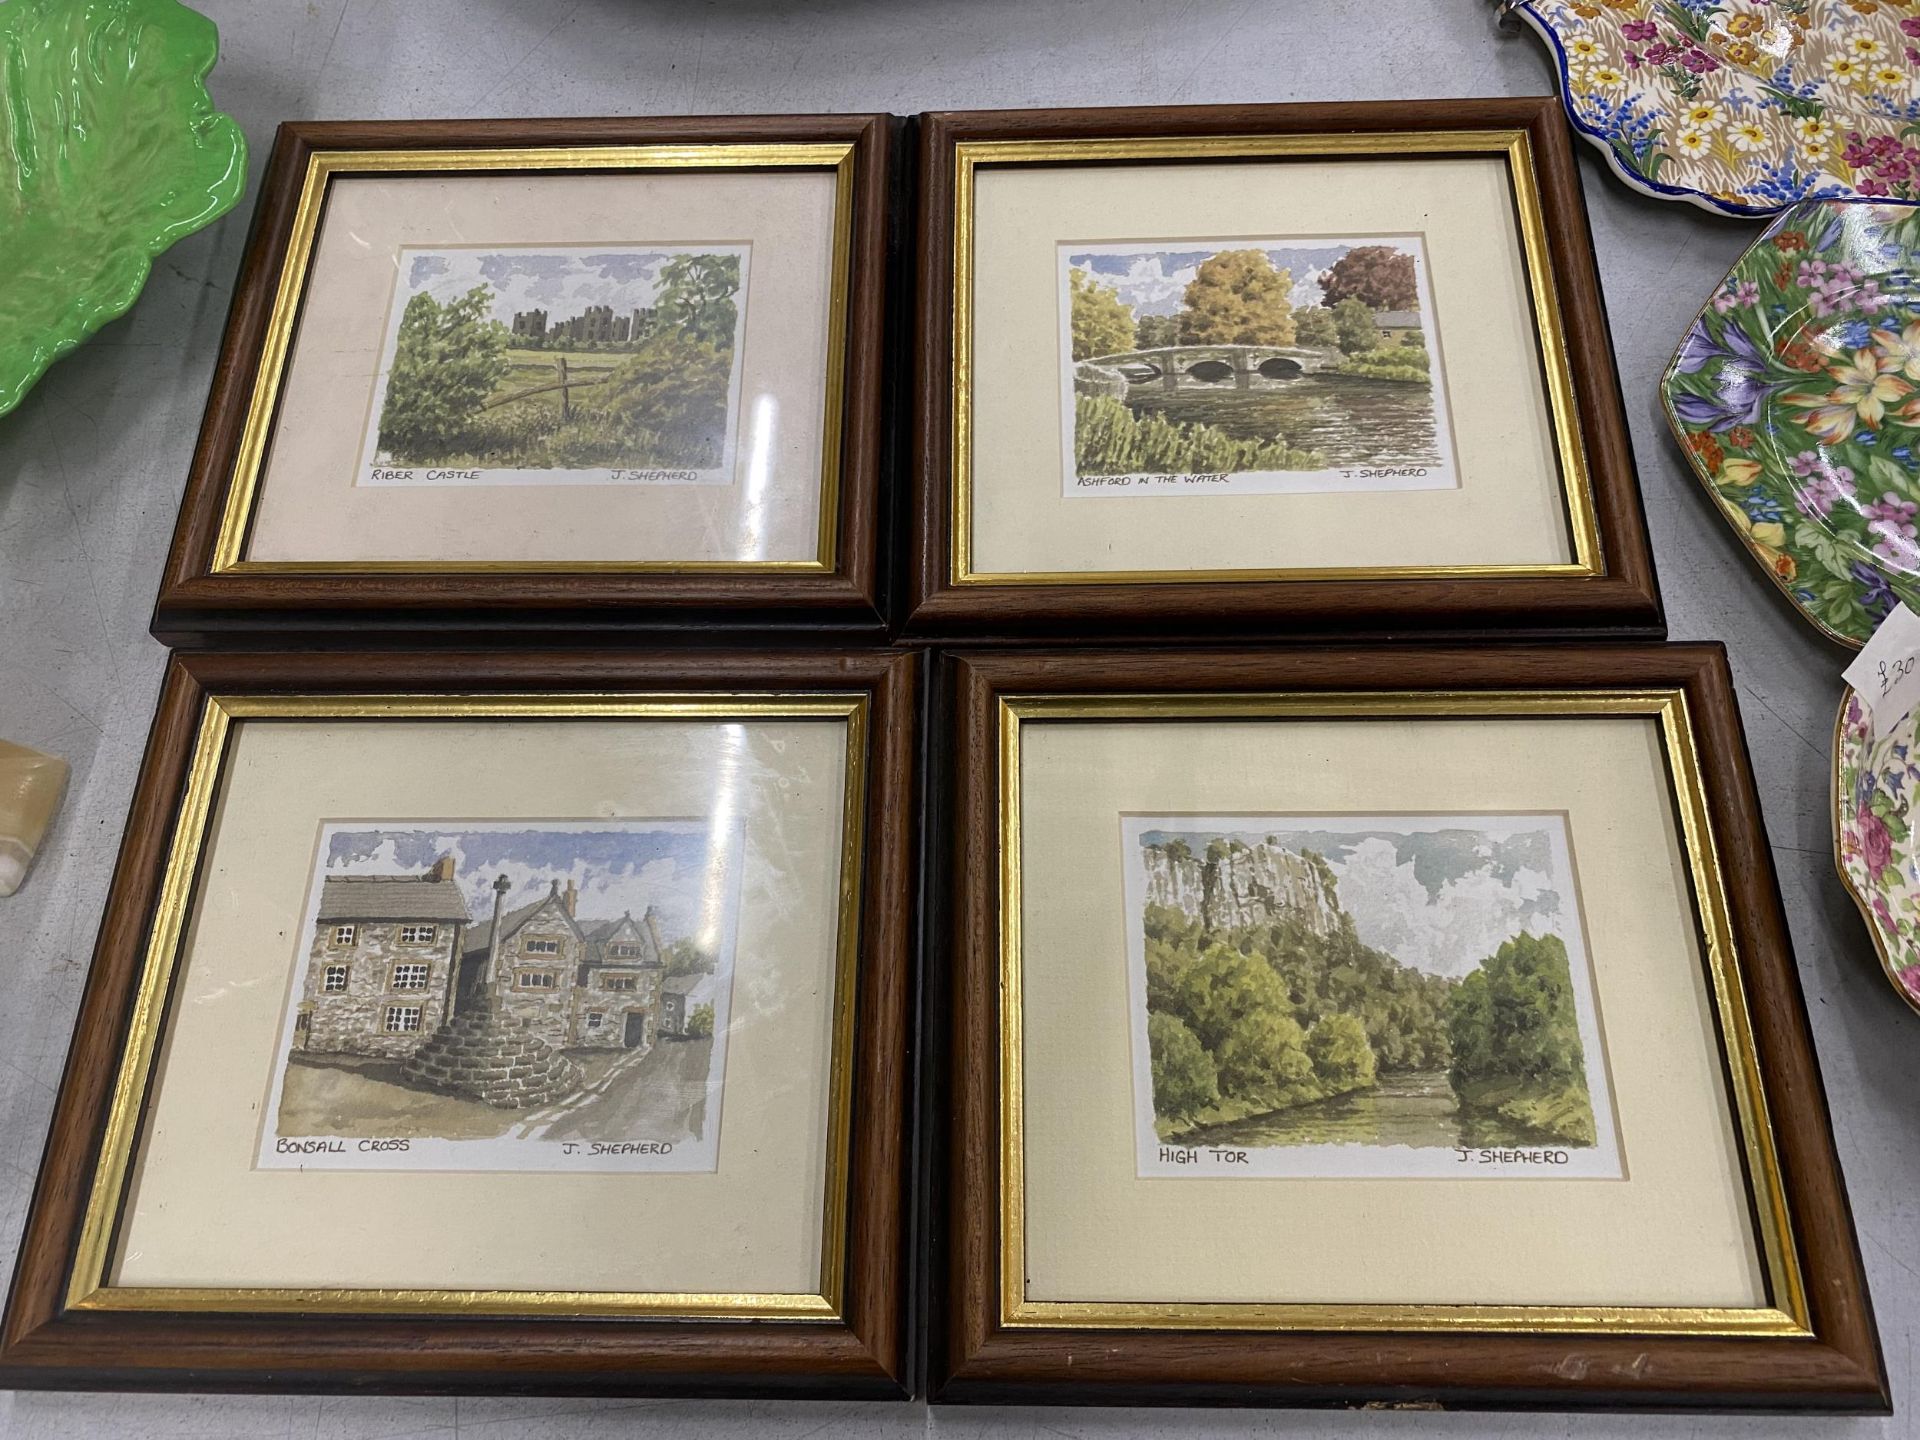 FOUR SMALL FRAMED PRINTS - RIBER CASTLE, ASHFORD IN THE WATER, BONSALL CROSS AND HIGH TOR, ALL BY